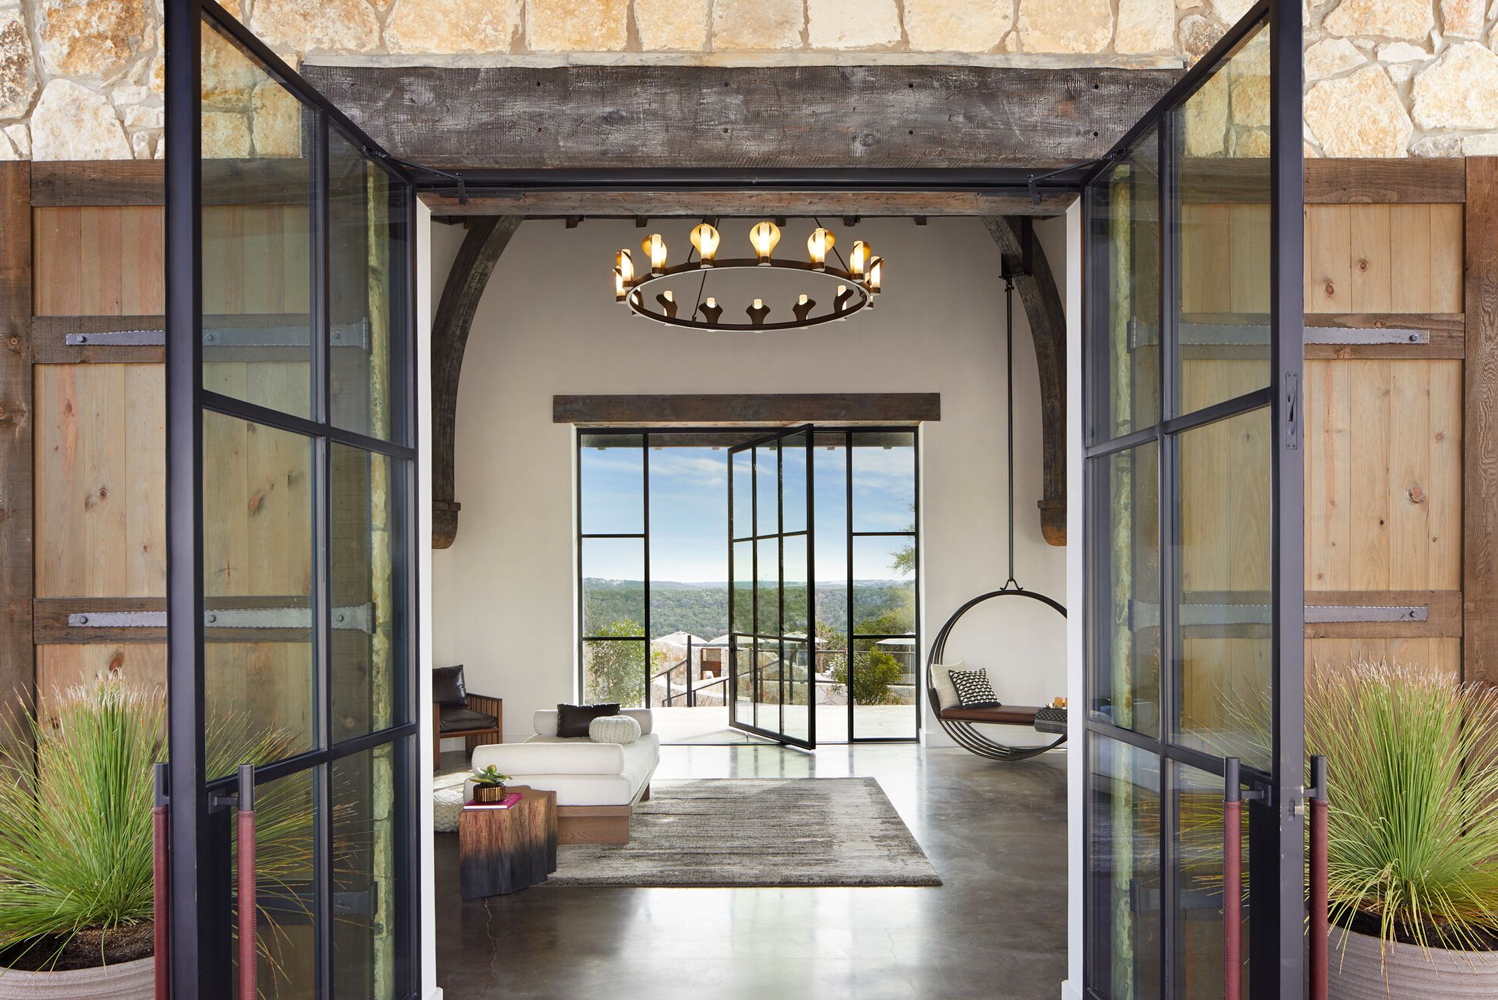 Hyatt brings its Miraval spa and wellness brand to Austin Texas with the opening of Miraval Austin 